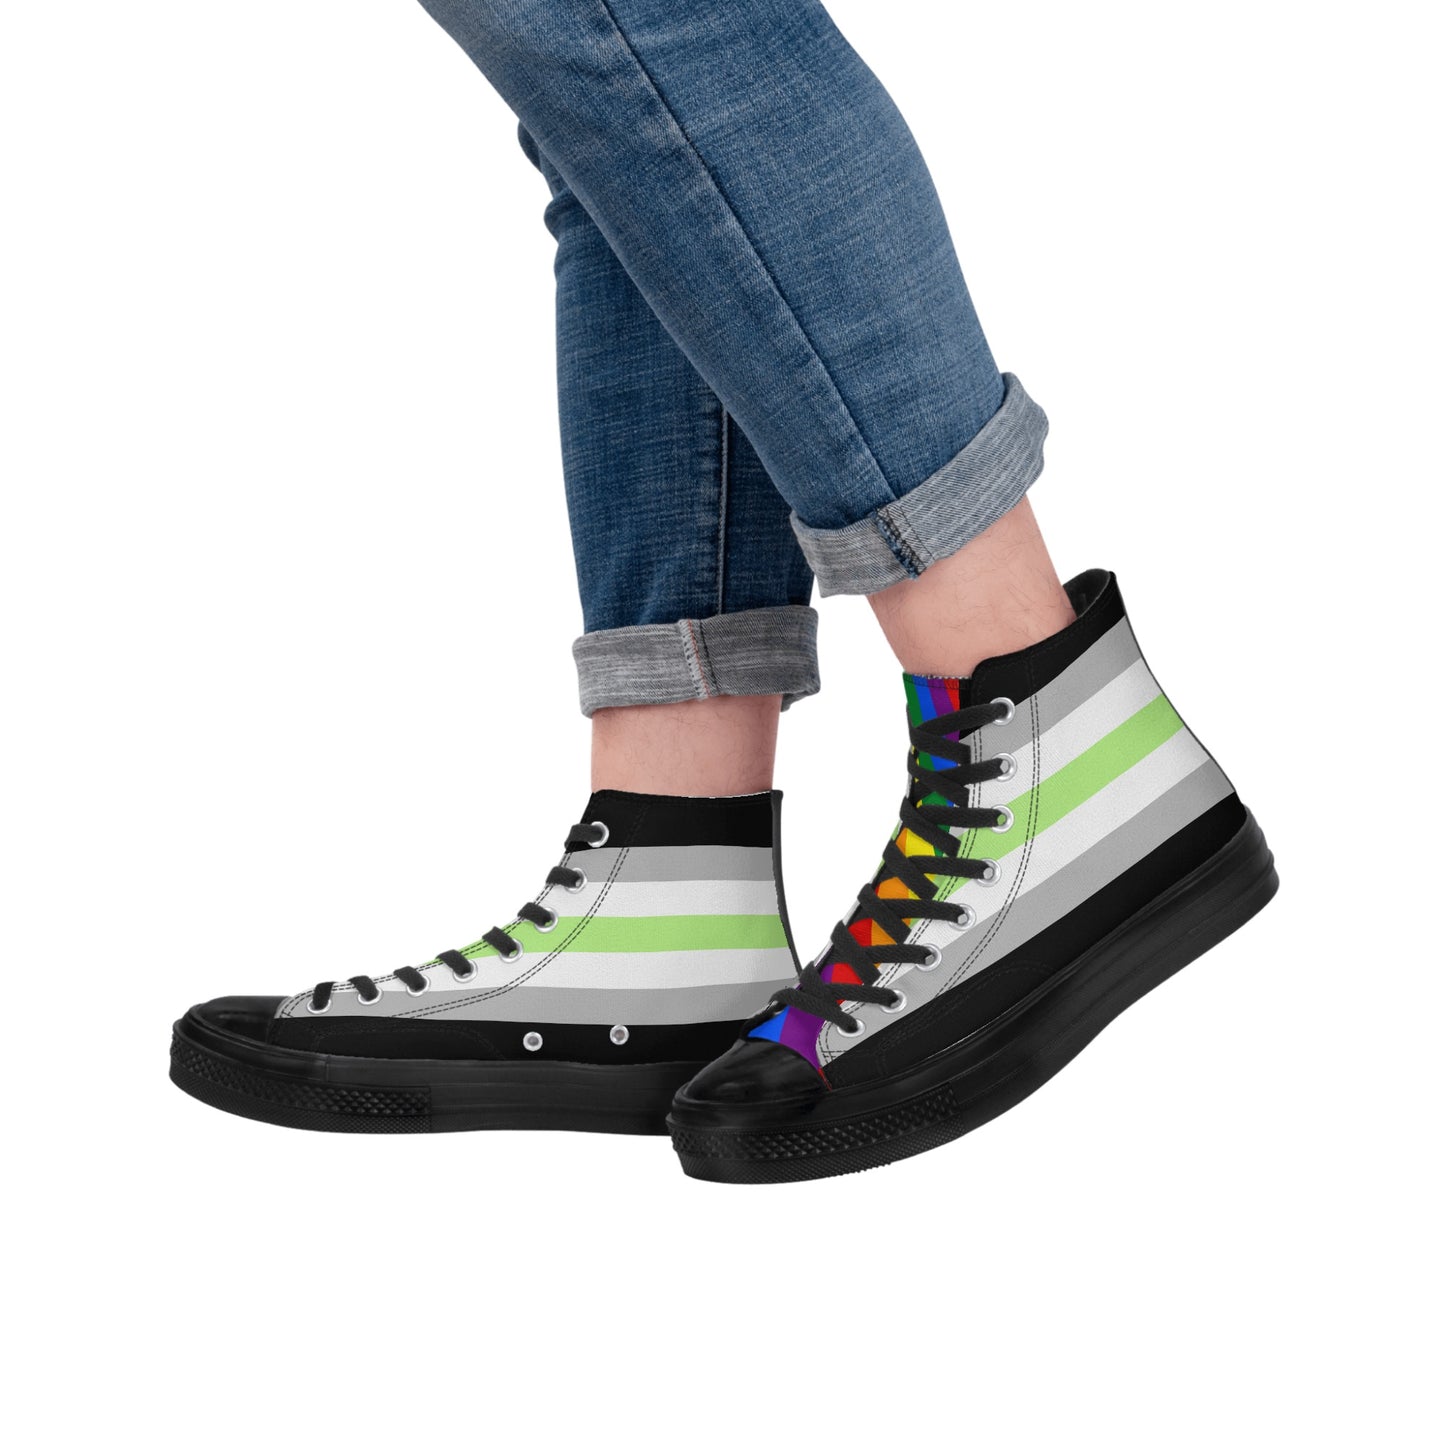 Agender Pride Collection - Mens Classic Black High Top Canvas Shoes for the LGBTQIA+ community